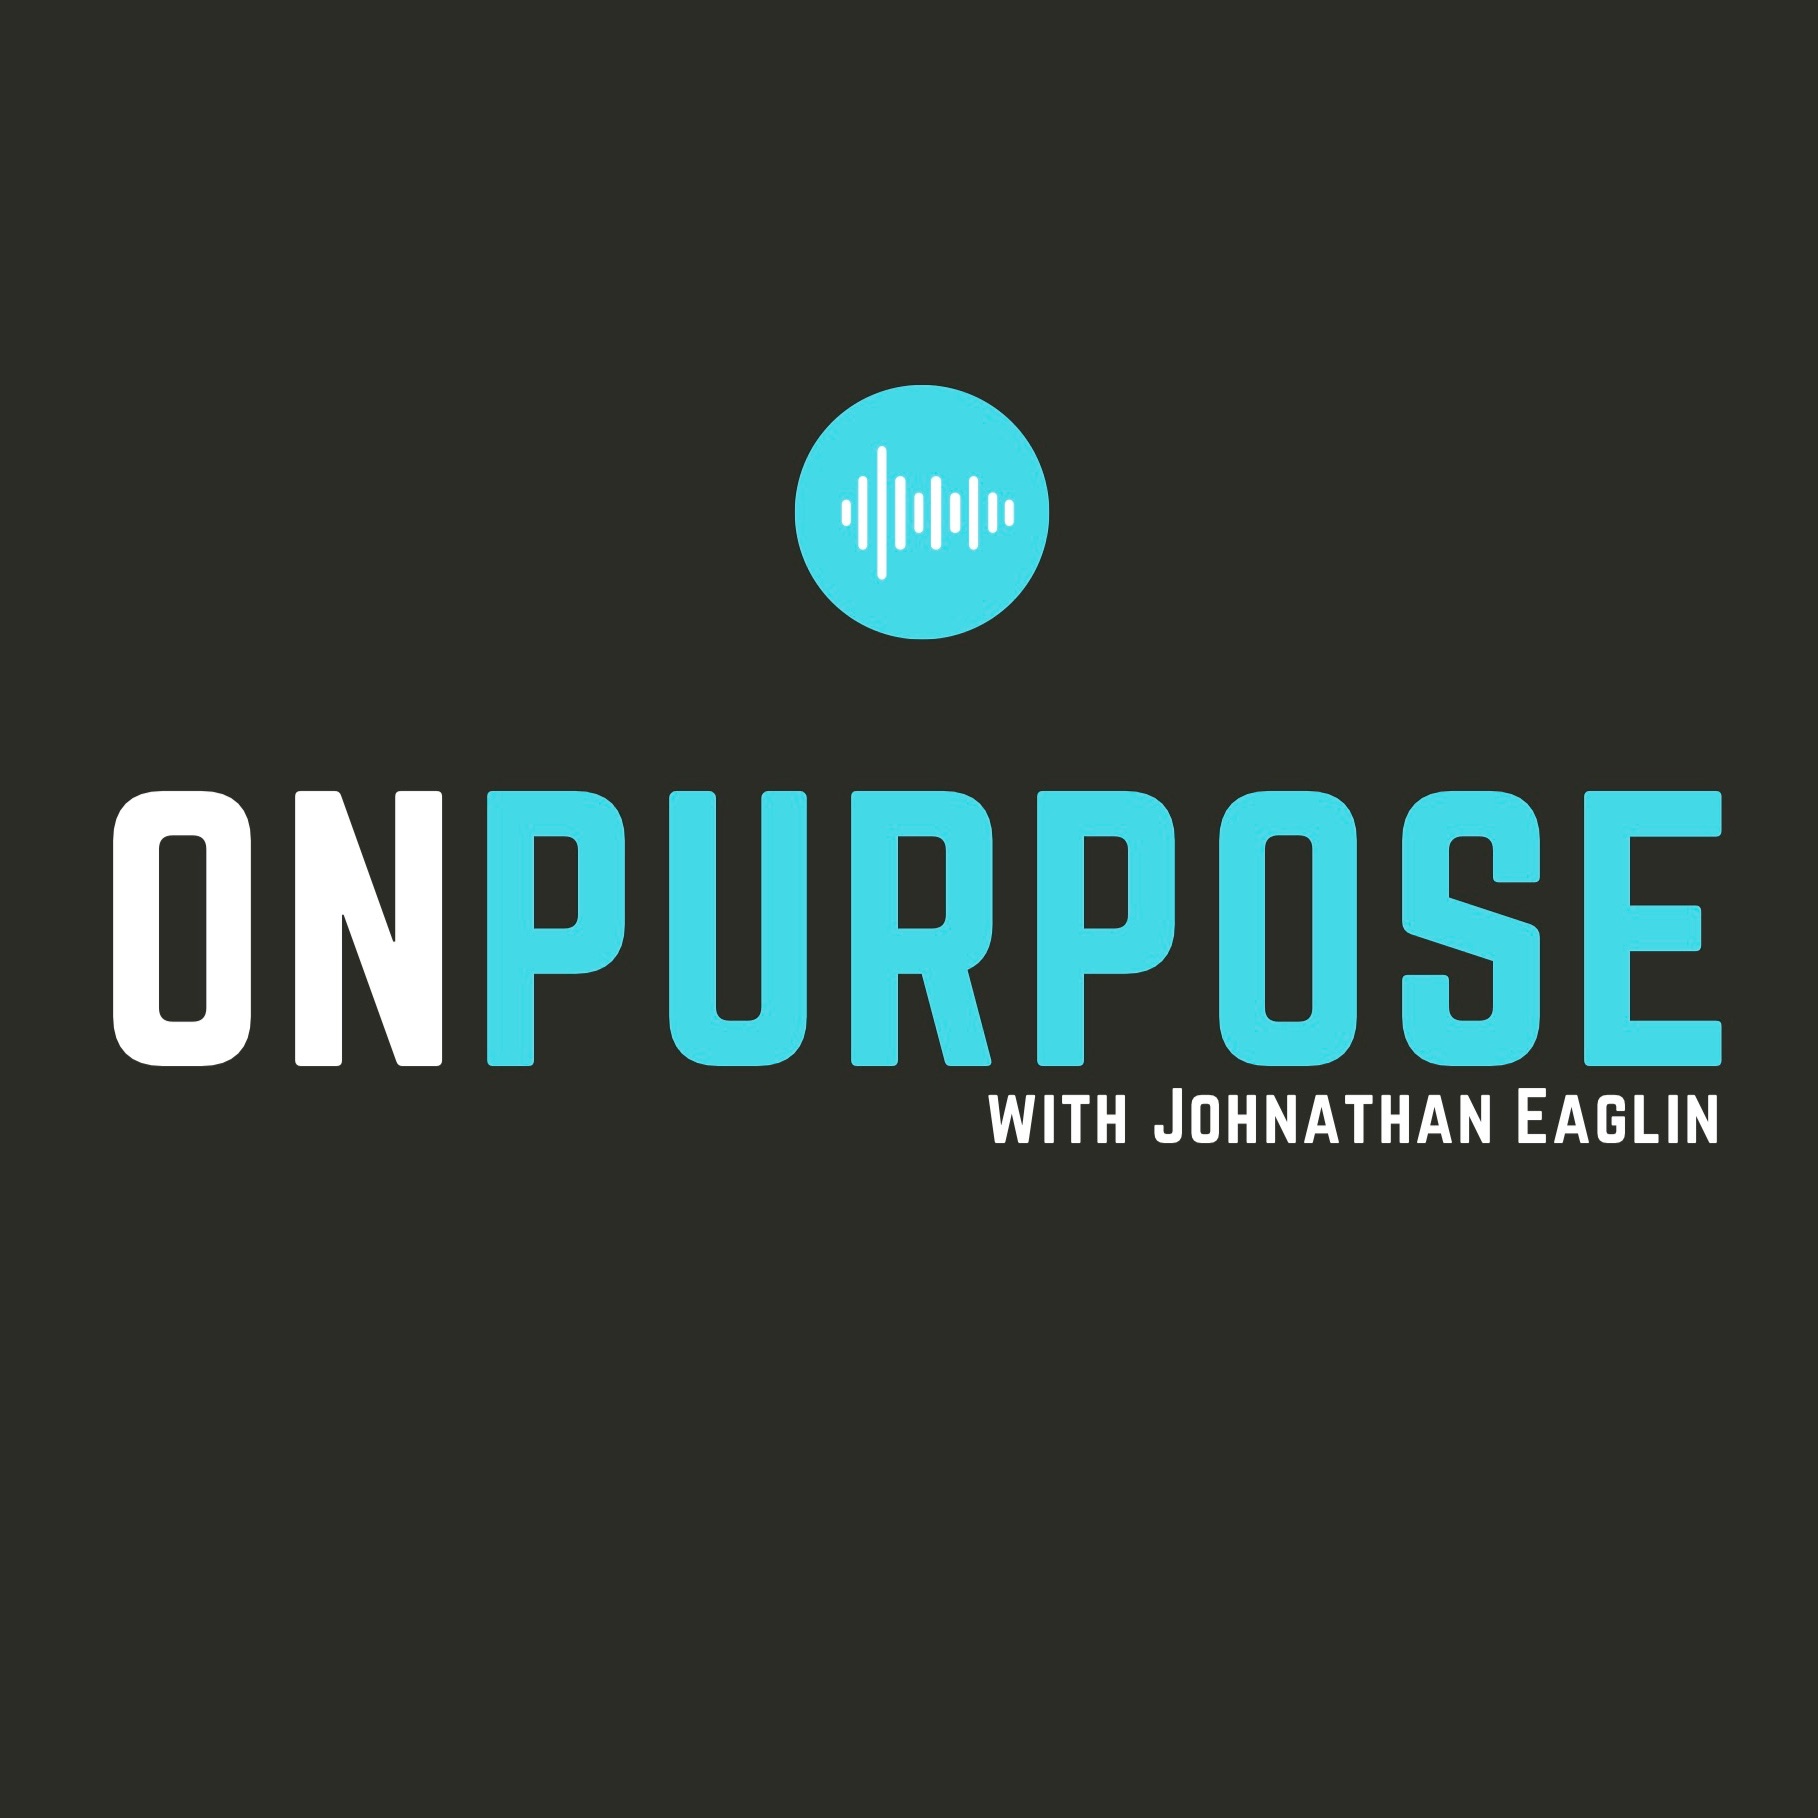 On Purpose with Johnathan Eaglin